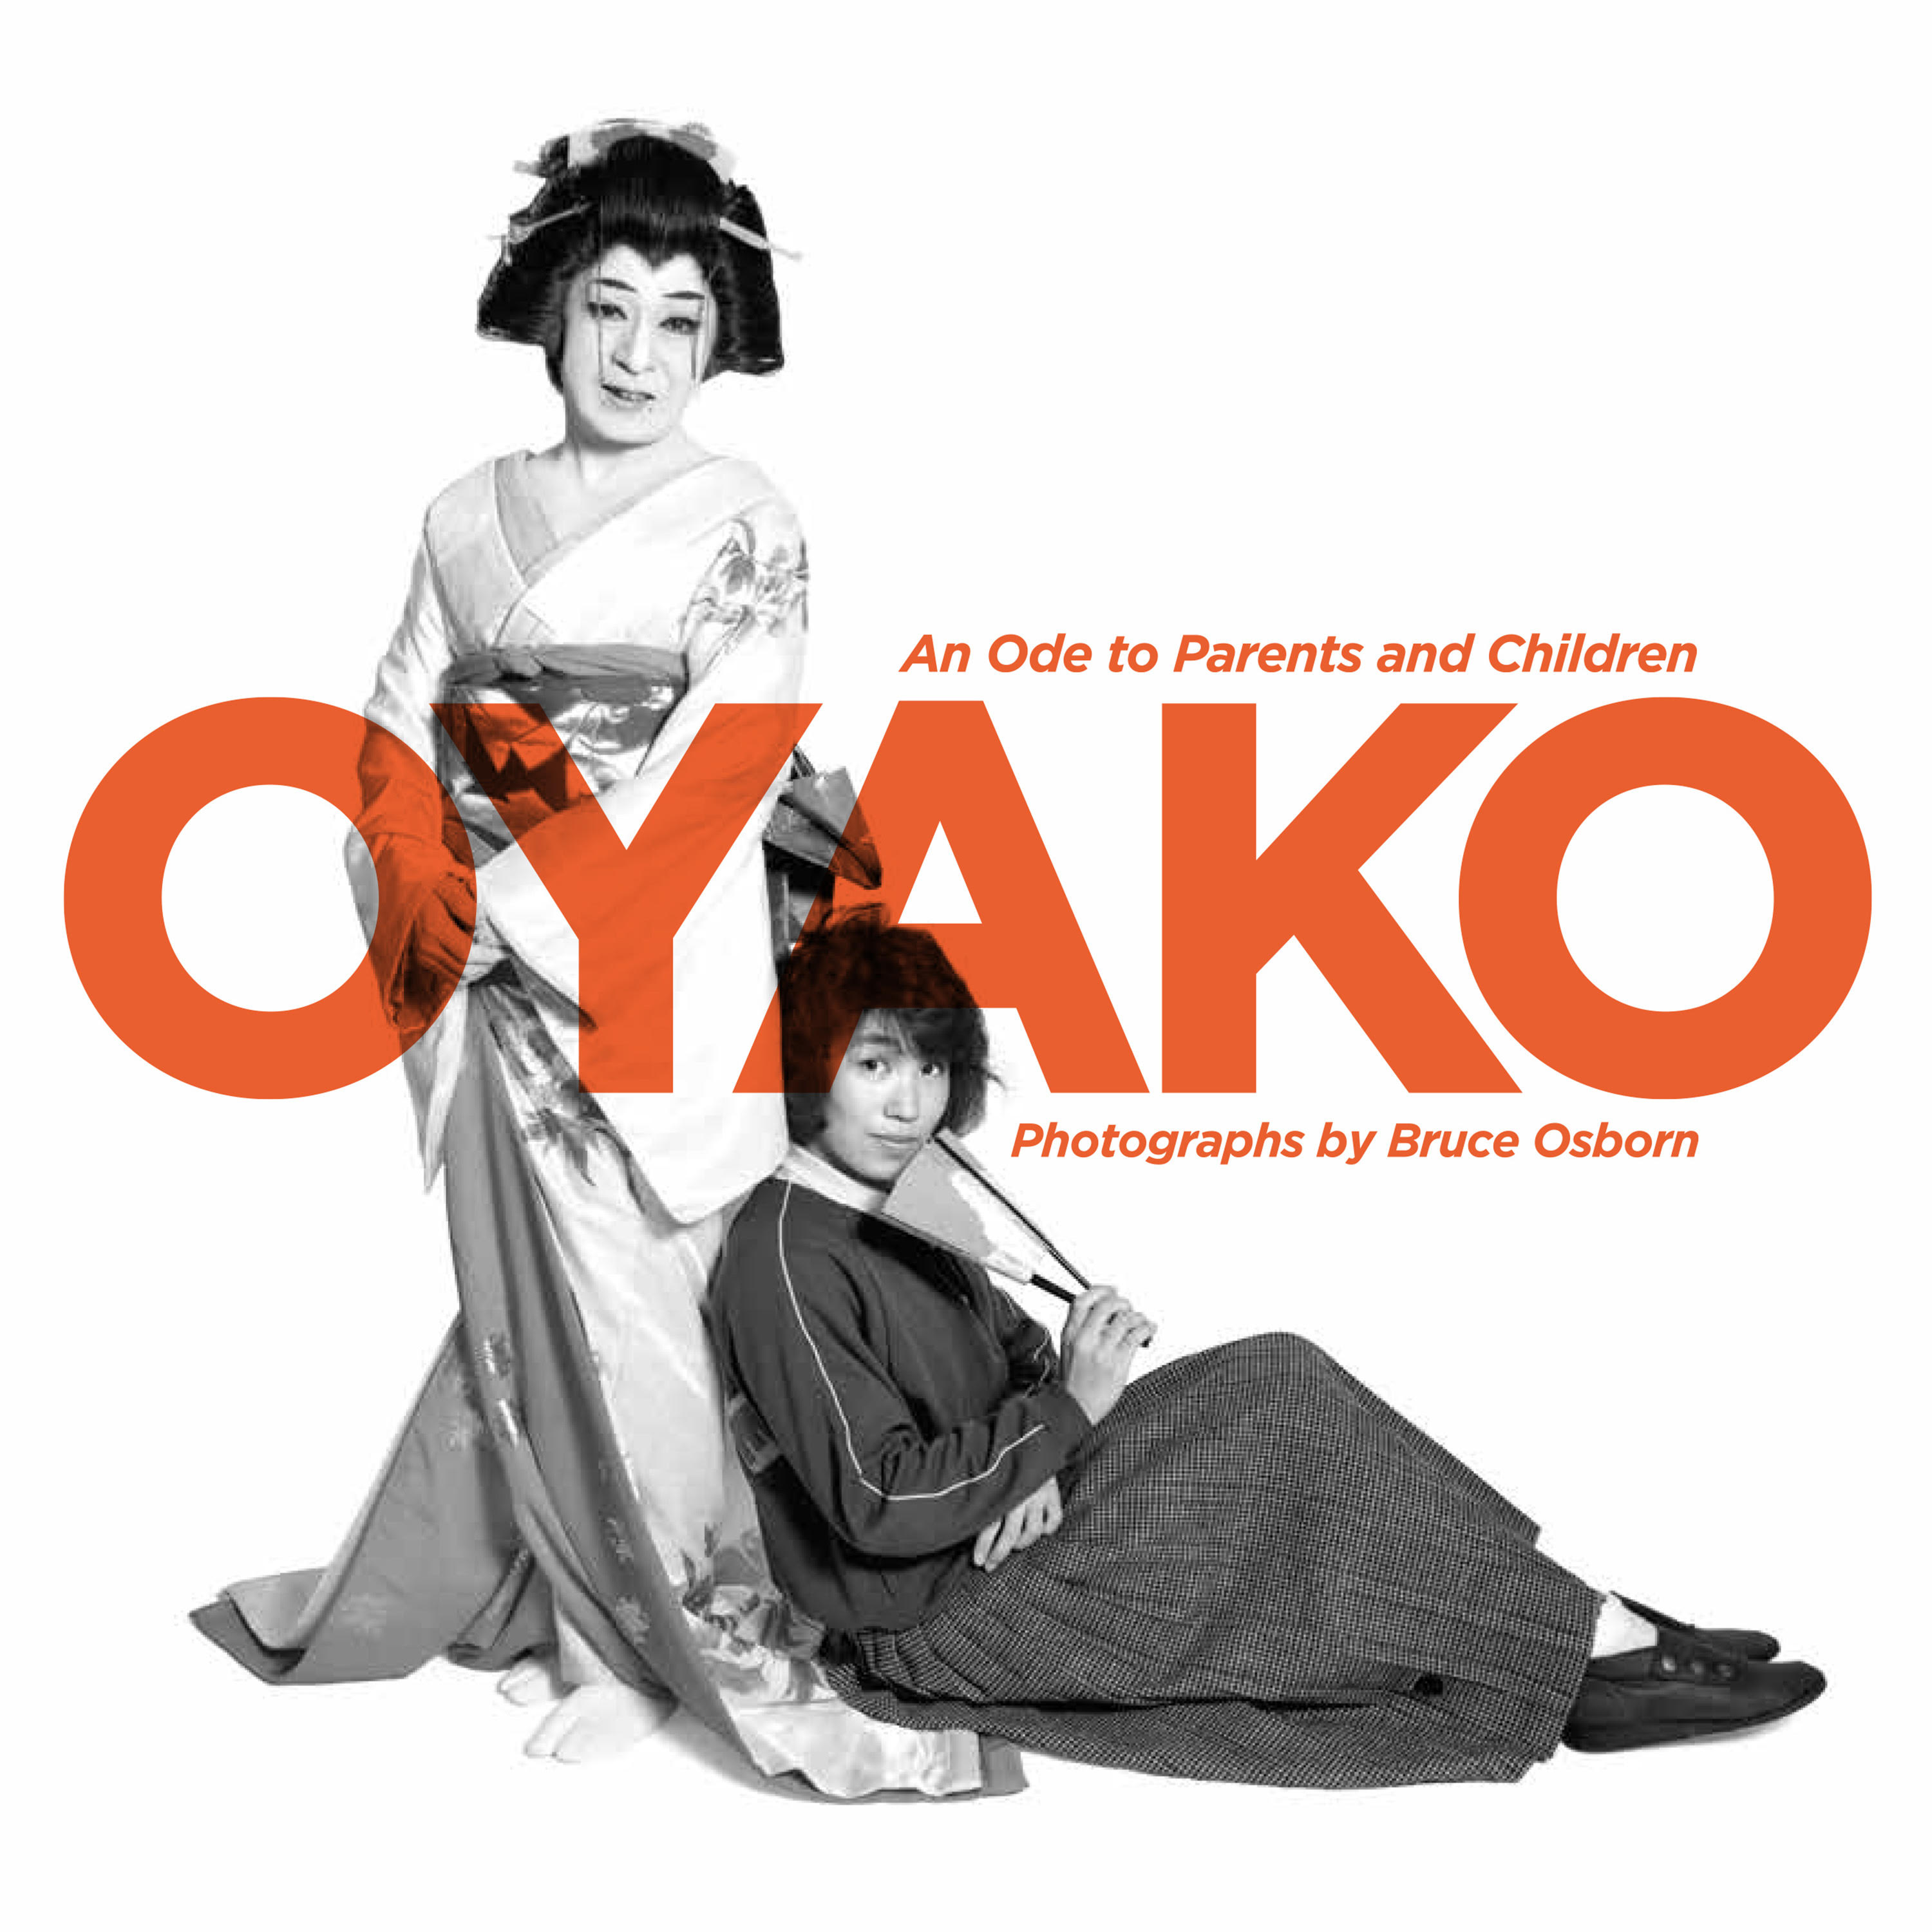 Bruce Osborn Explores Parent-Child Dynamics in Japan with “OYAKO”